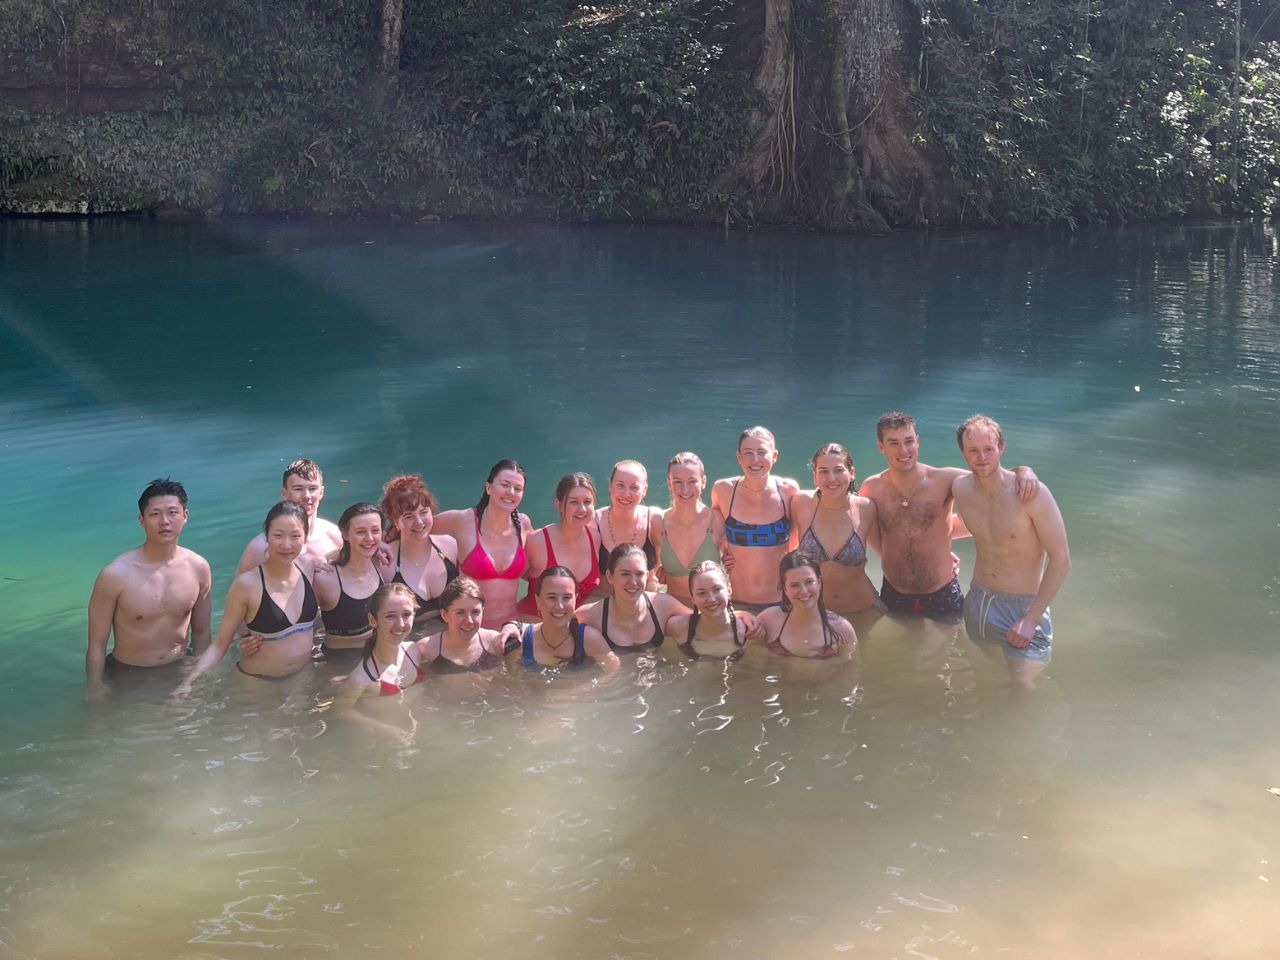 Group photo of BSc Environmental Geoscience students in a blue lagoon, Jamaica field trip.